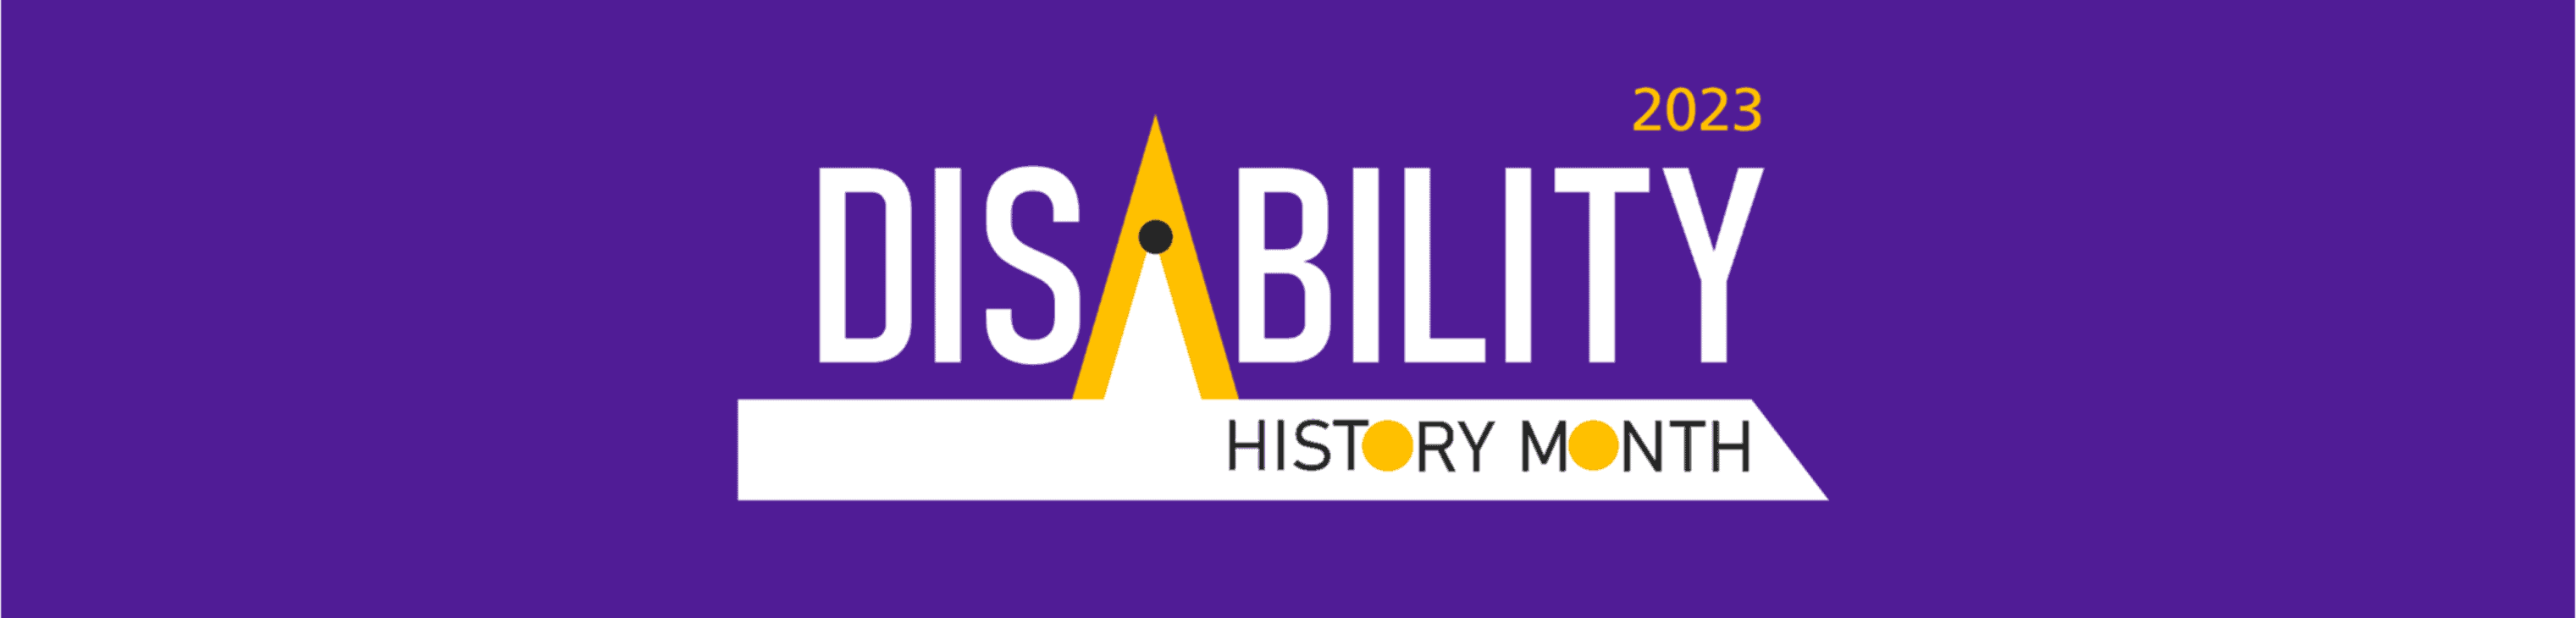 UK Disability History Month 2023 logo cover art